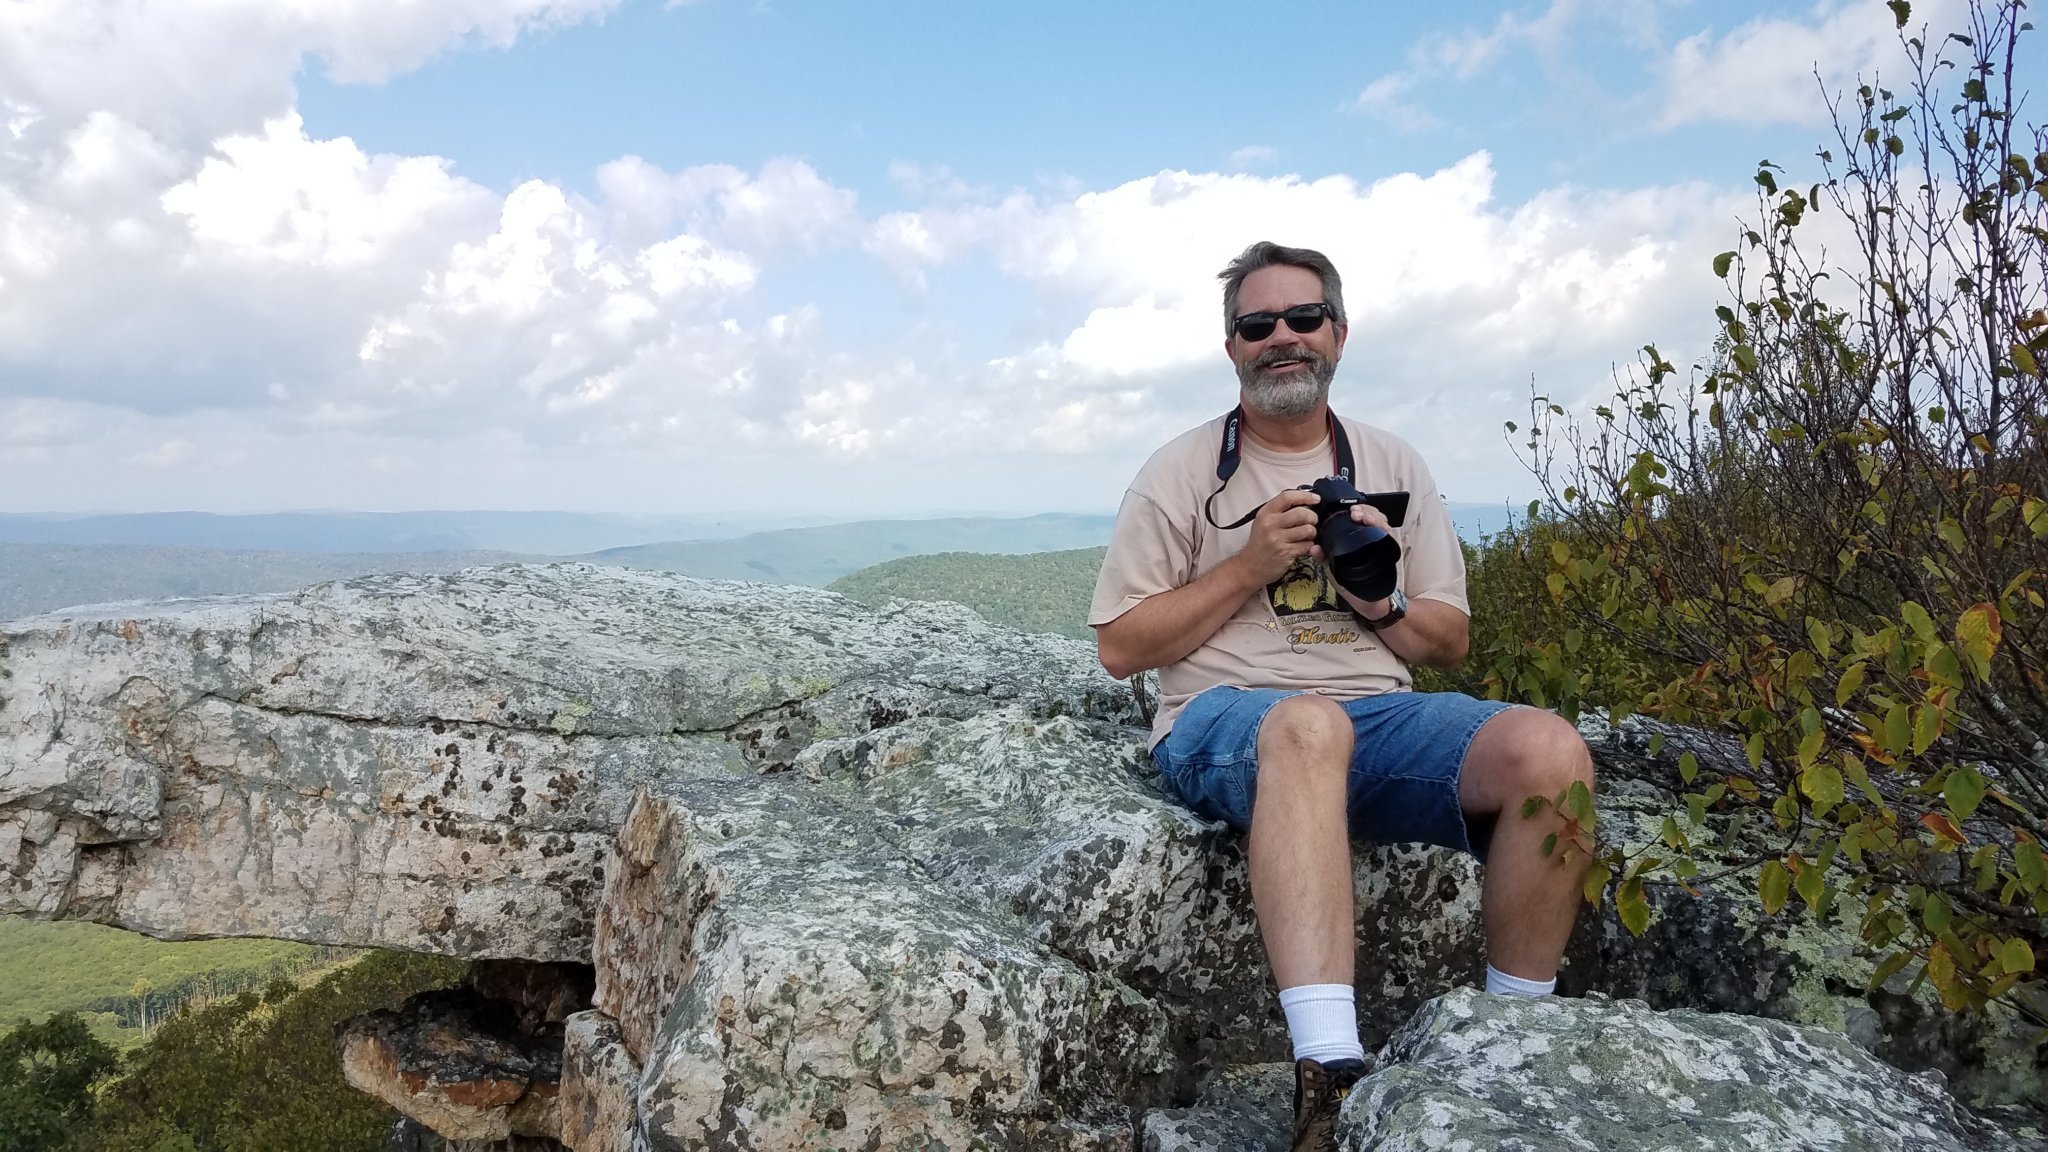 A man with gray hair, beard and sunglasses sits on a rock overlooking hills, holding a camera.